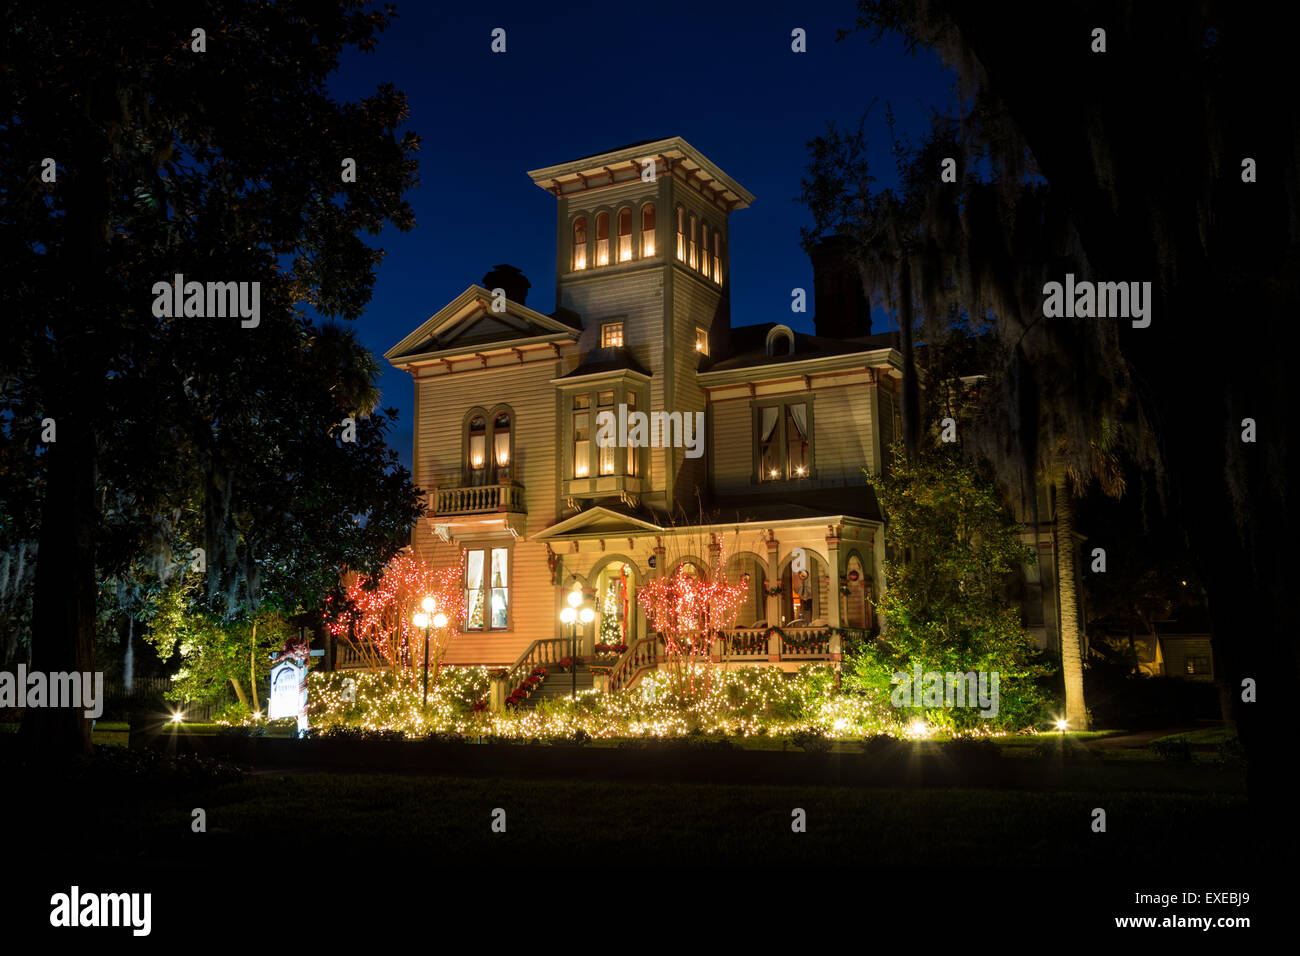 The Fairbanks House Bed and Breakfast decorated in Christmas lights, Amelia Island, Florida Stock Photo